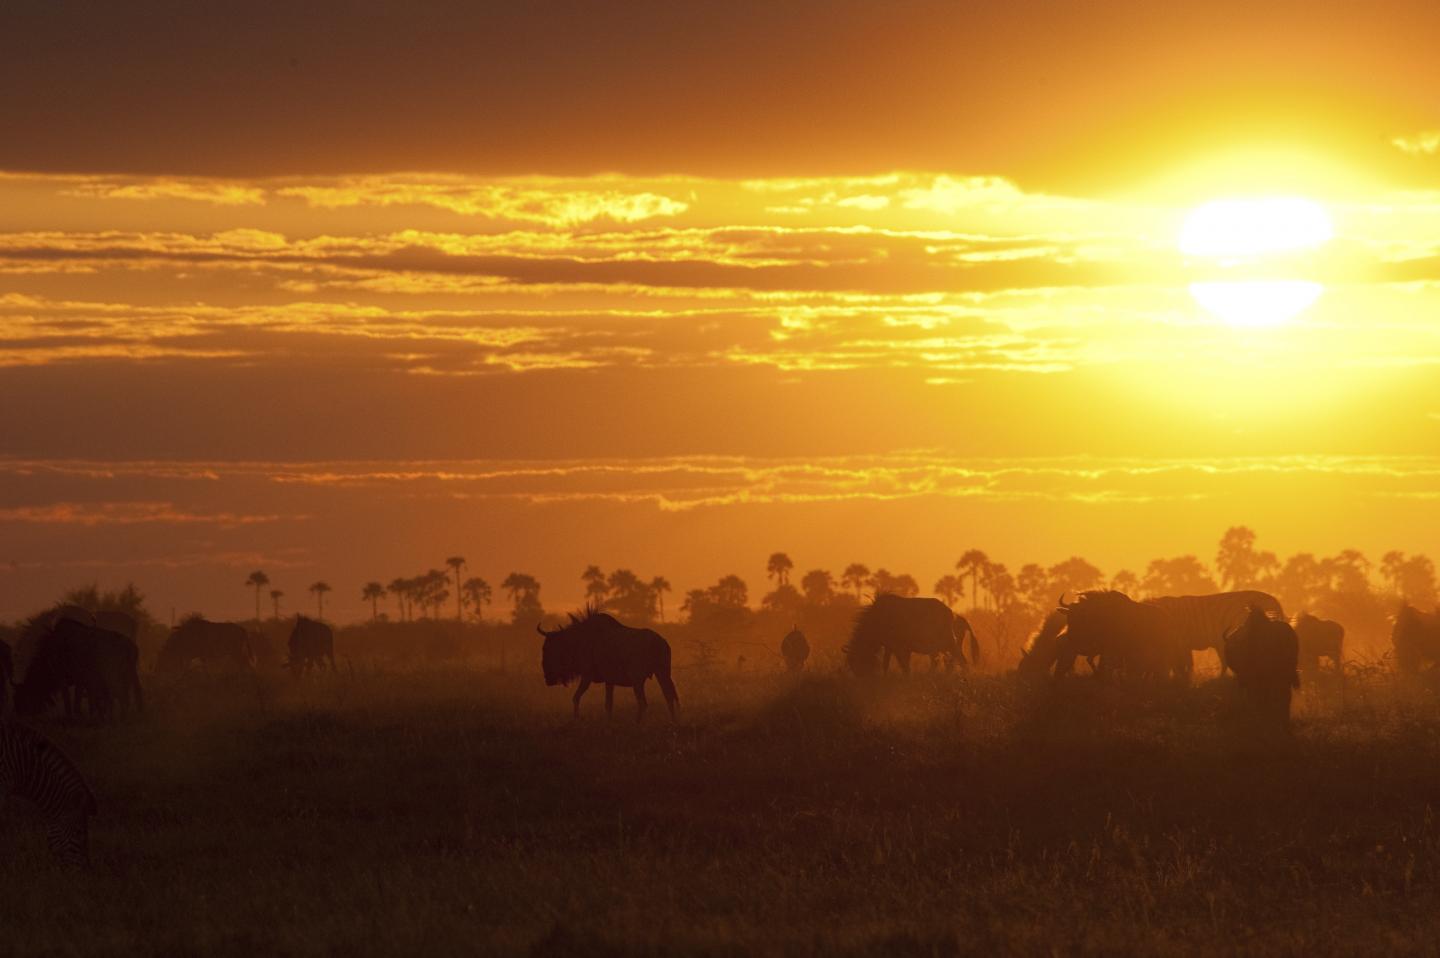 A Herd in Botswana at Sunset